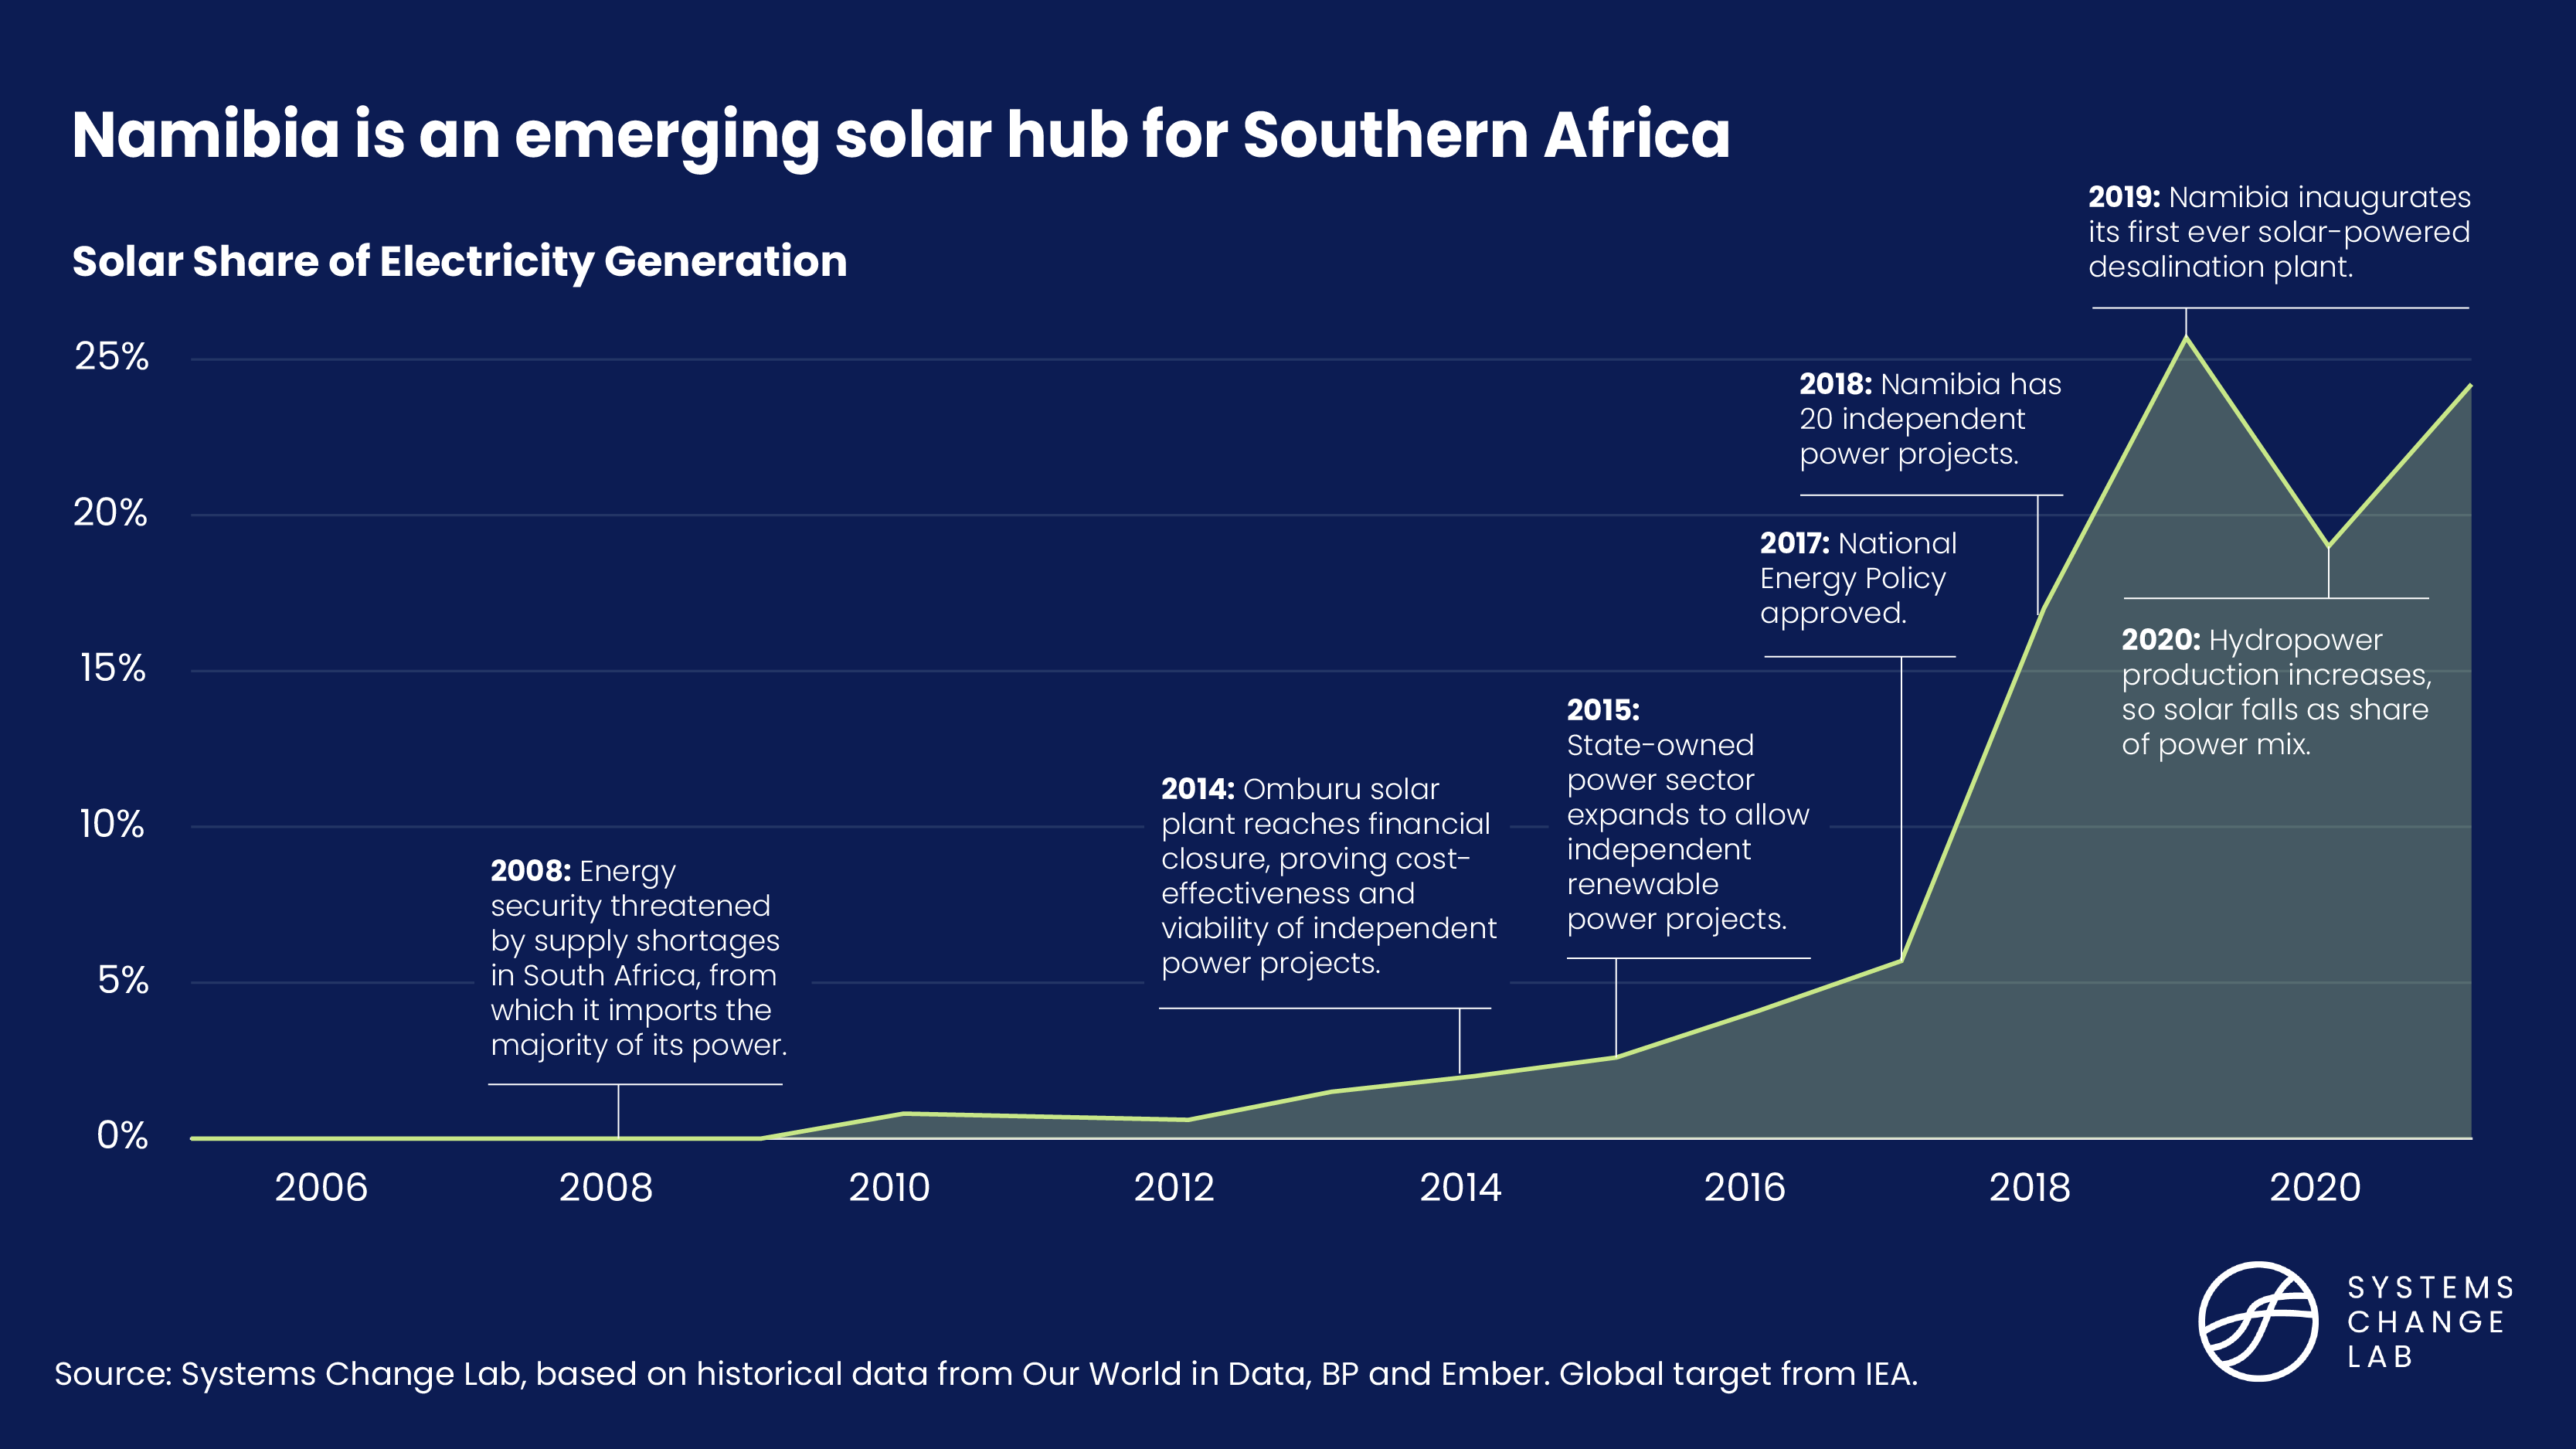 Namibia is an emerging solar hub for Southern Africa